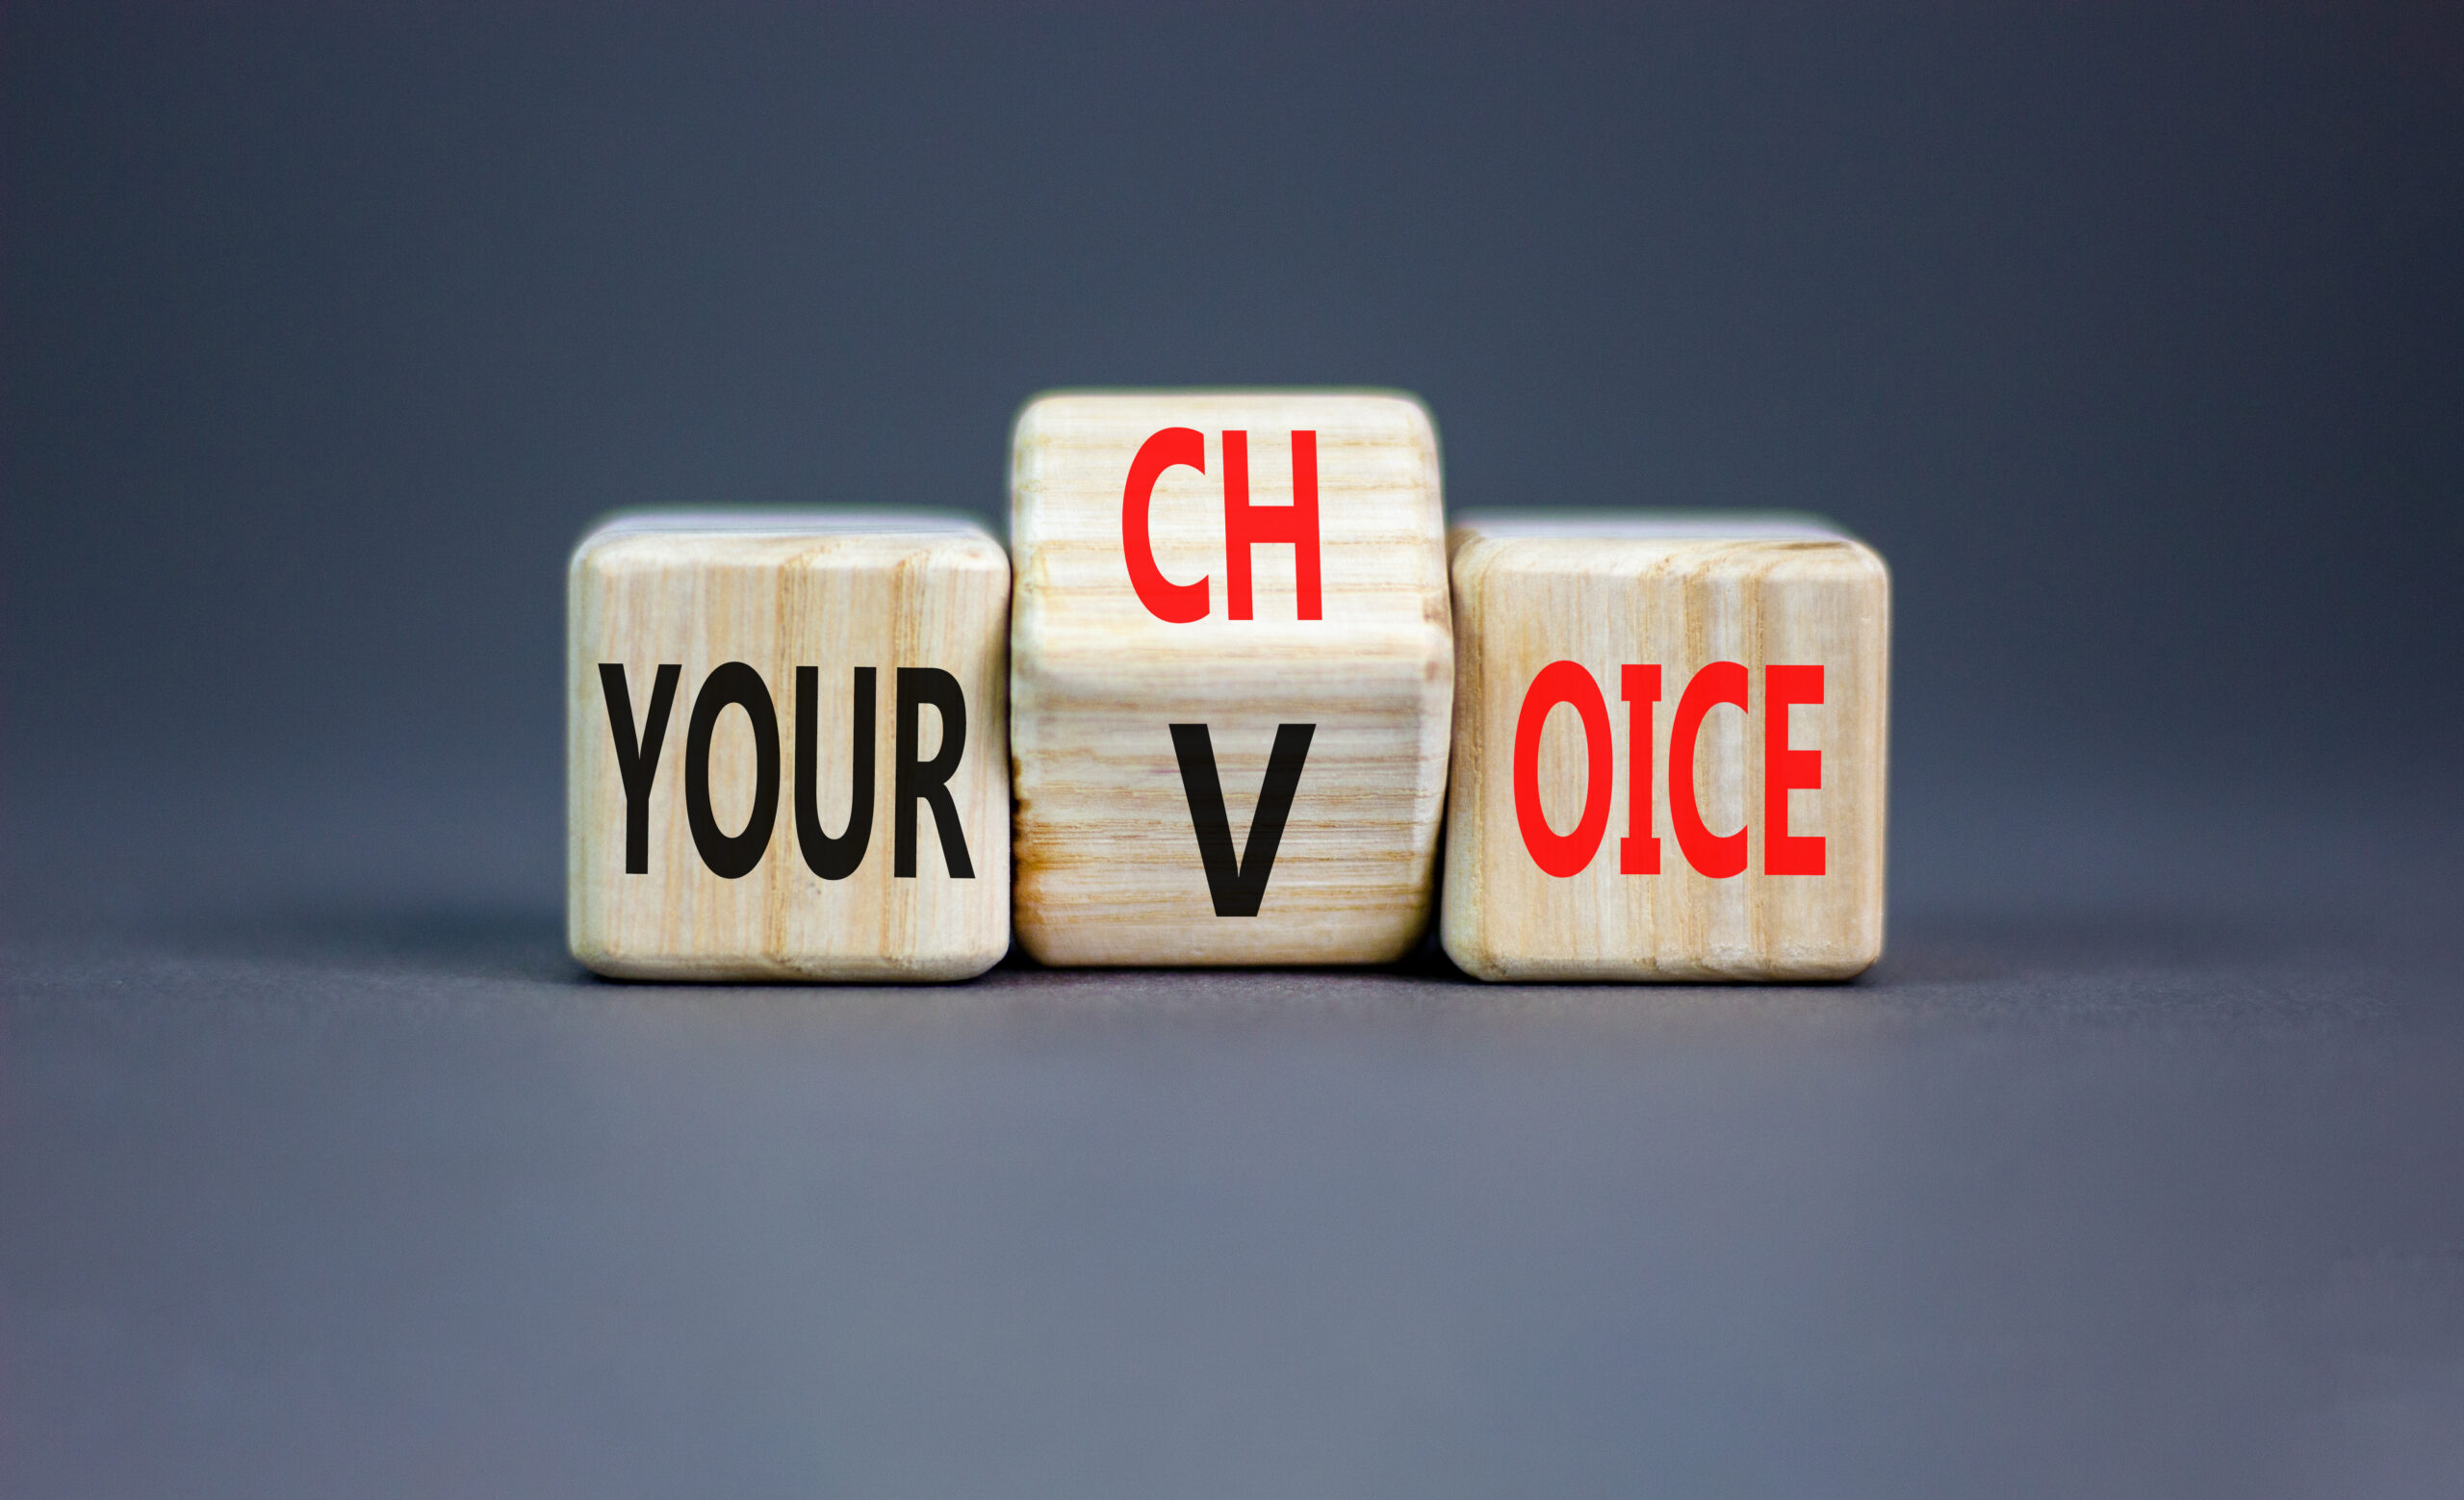 Your voice choice symbol. Wooden cubes with one cube changing "Voice" to "Choice"